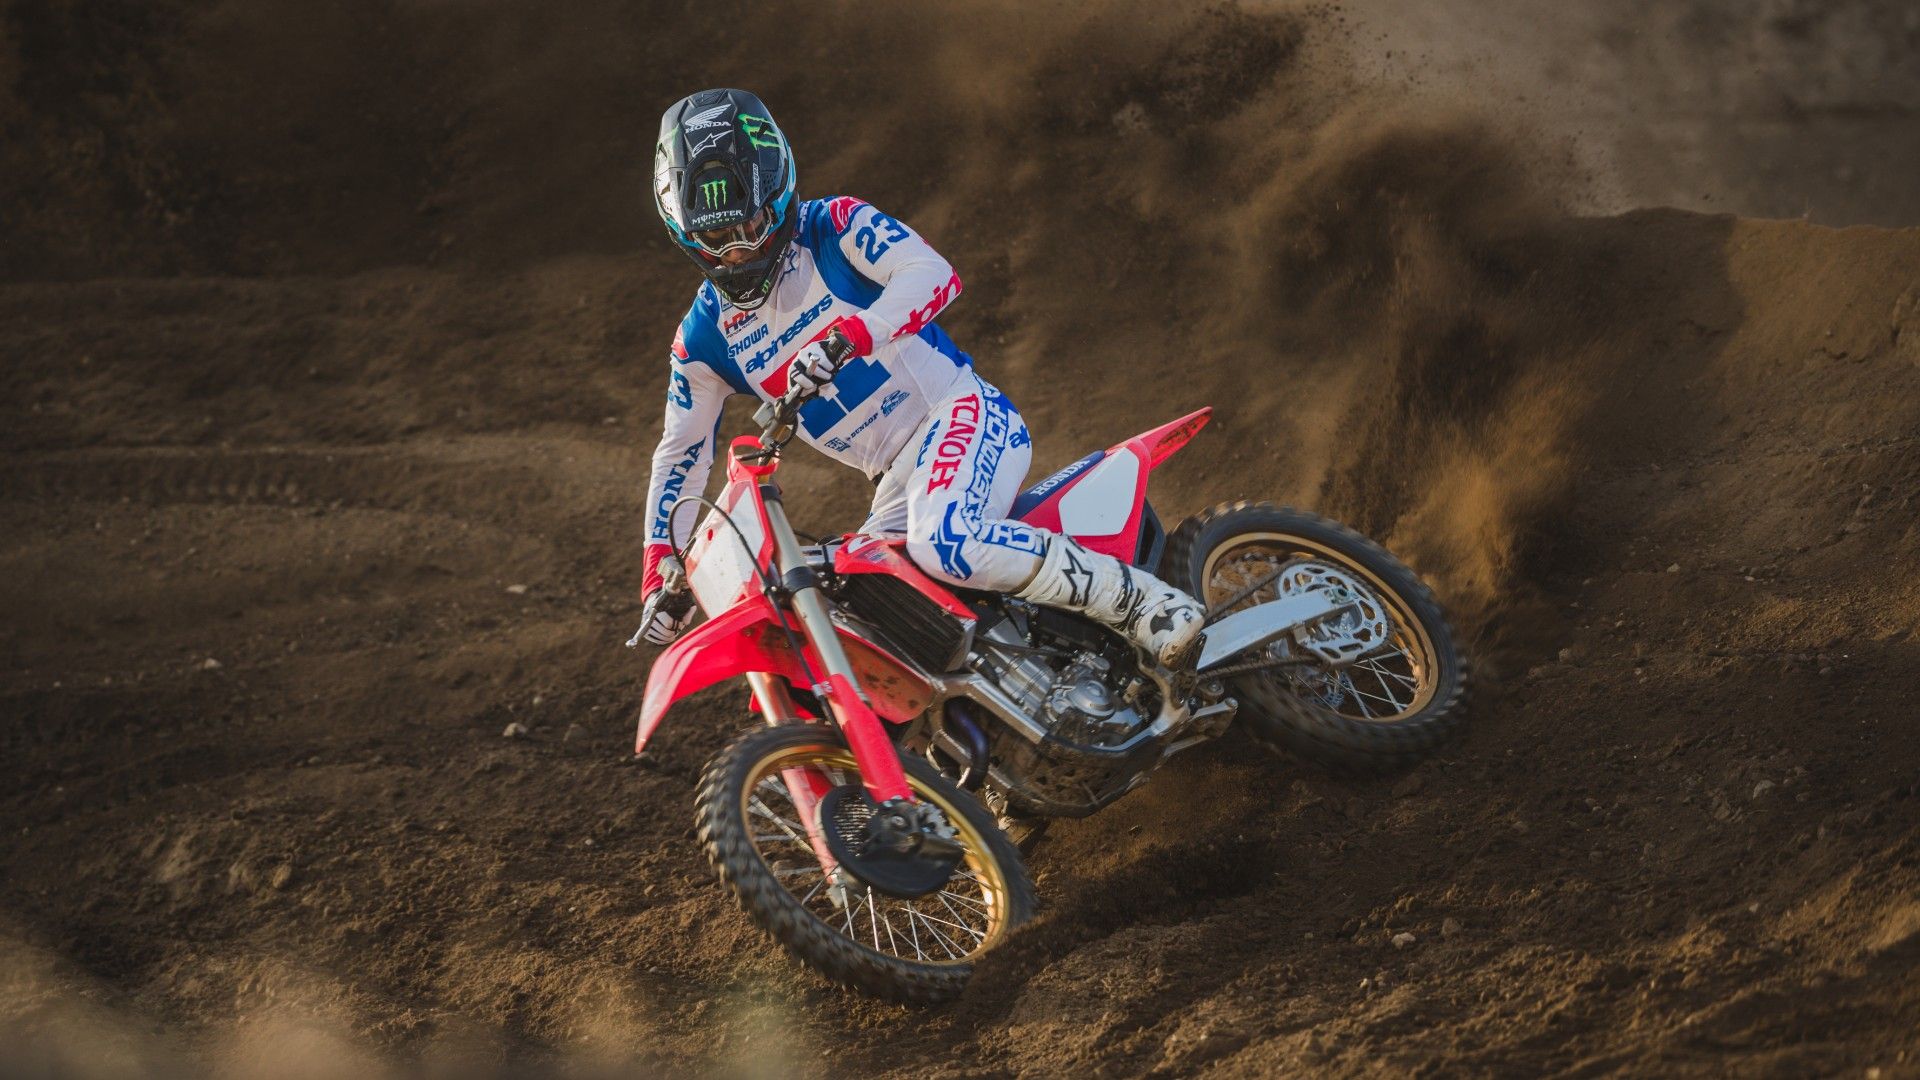 10 Most Powerful and Fastest Dirt Bikes in the World - Motocross